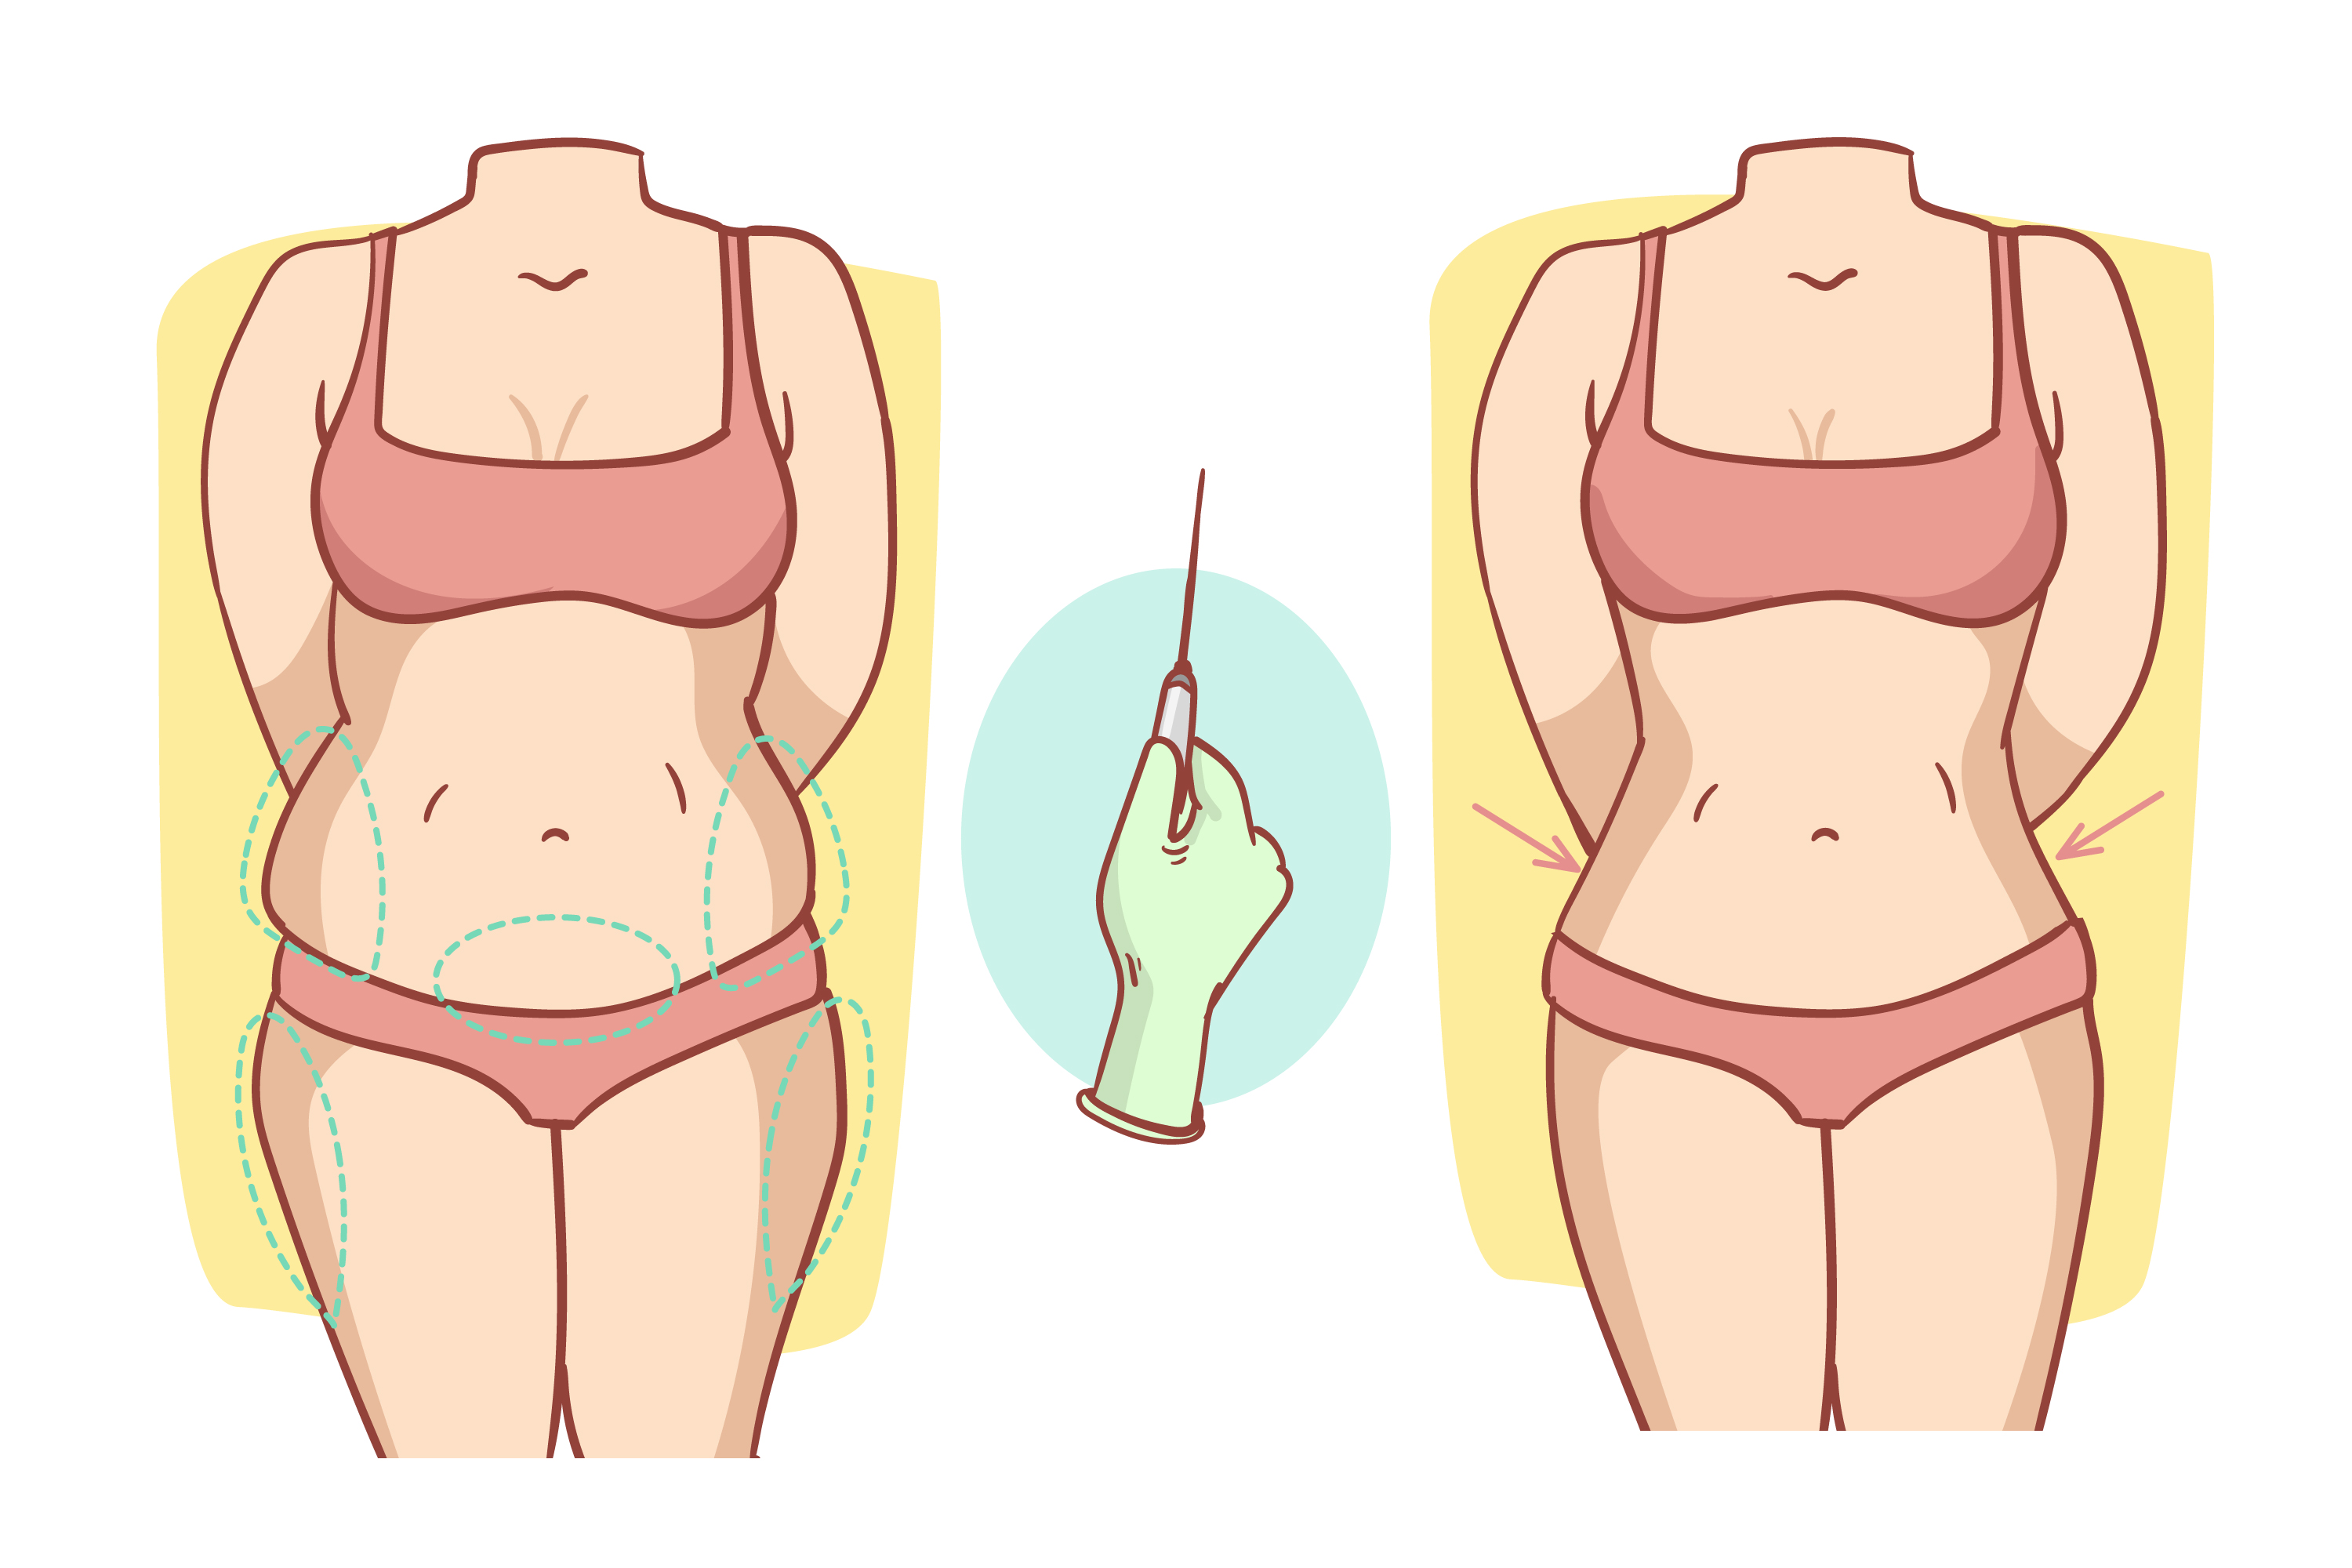 5 Reasons Behind the Ubiquitous Popularity of Tummy Tuck Surgery